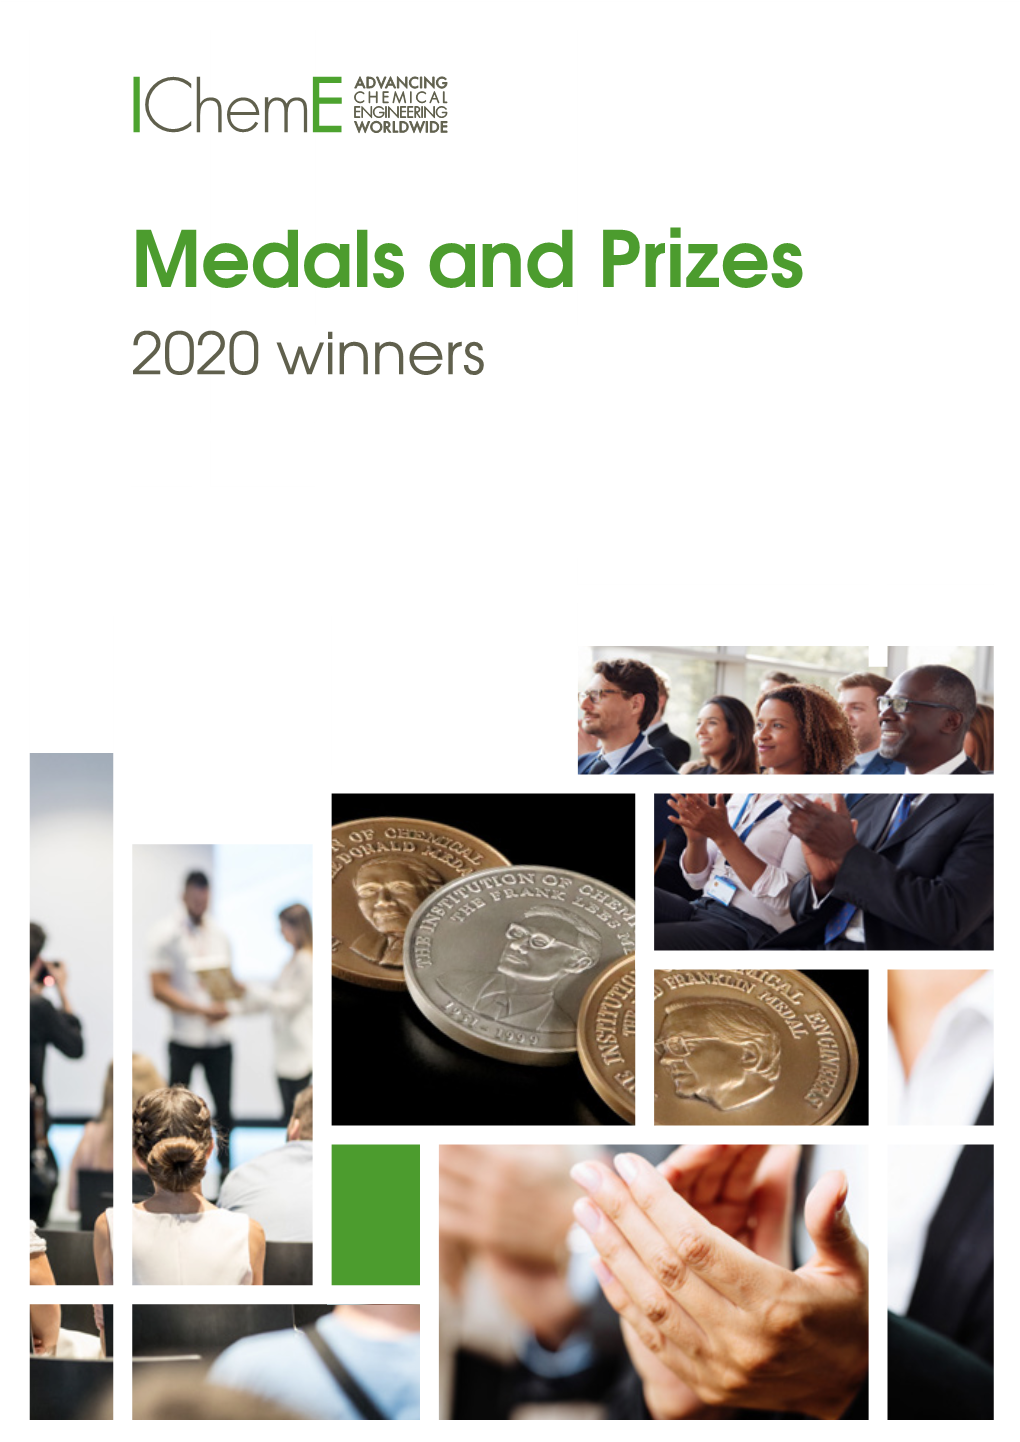 Medals and Prizes 2020 Winners Icheme Advances Chemical Engineering’S Contribution Worldwide for the Benefit of Society